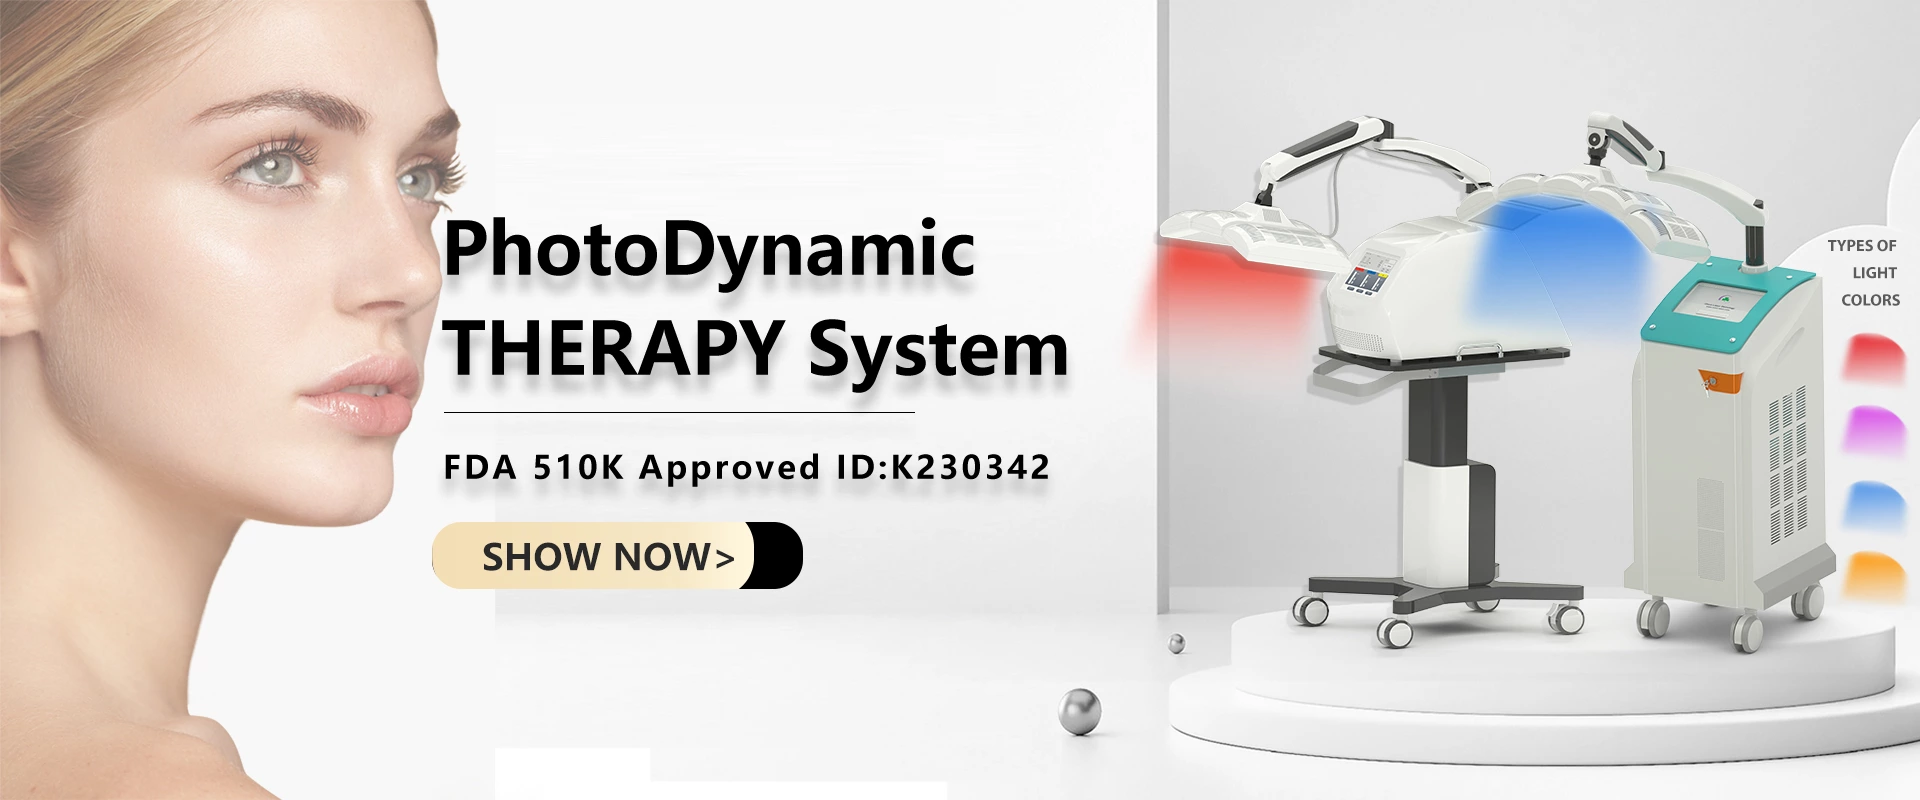 Photo Dynamic Therapy (PDT) Introduction and Usage